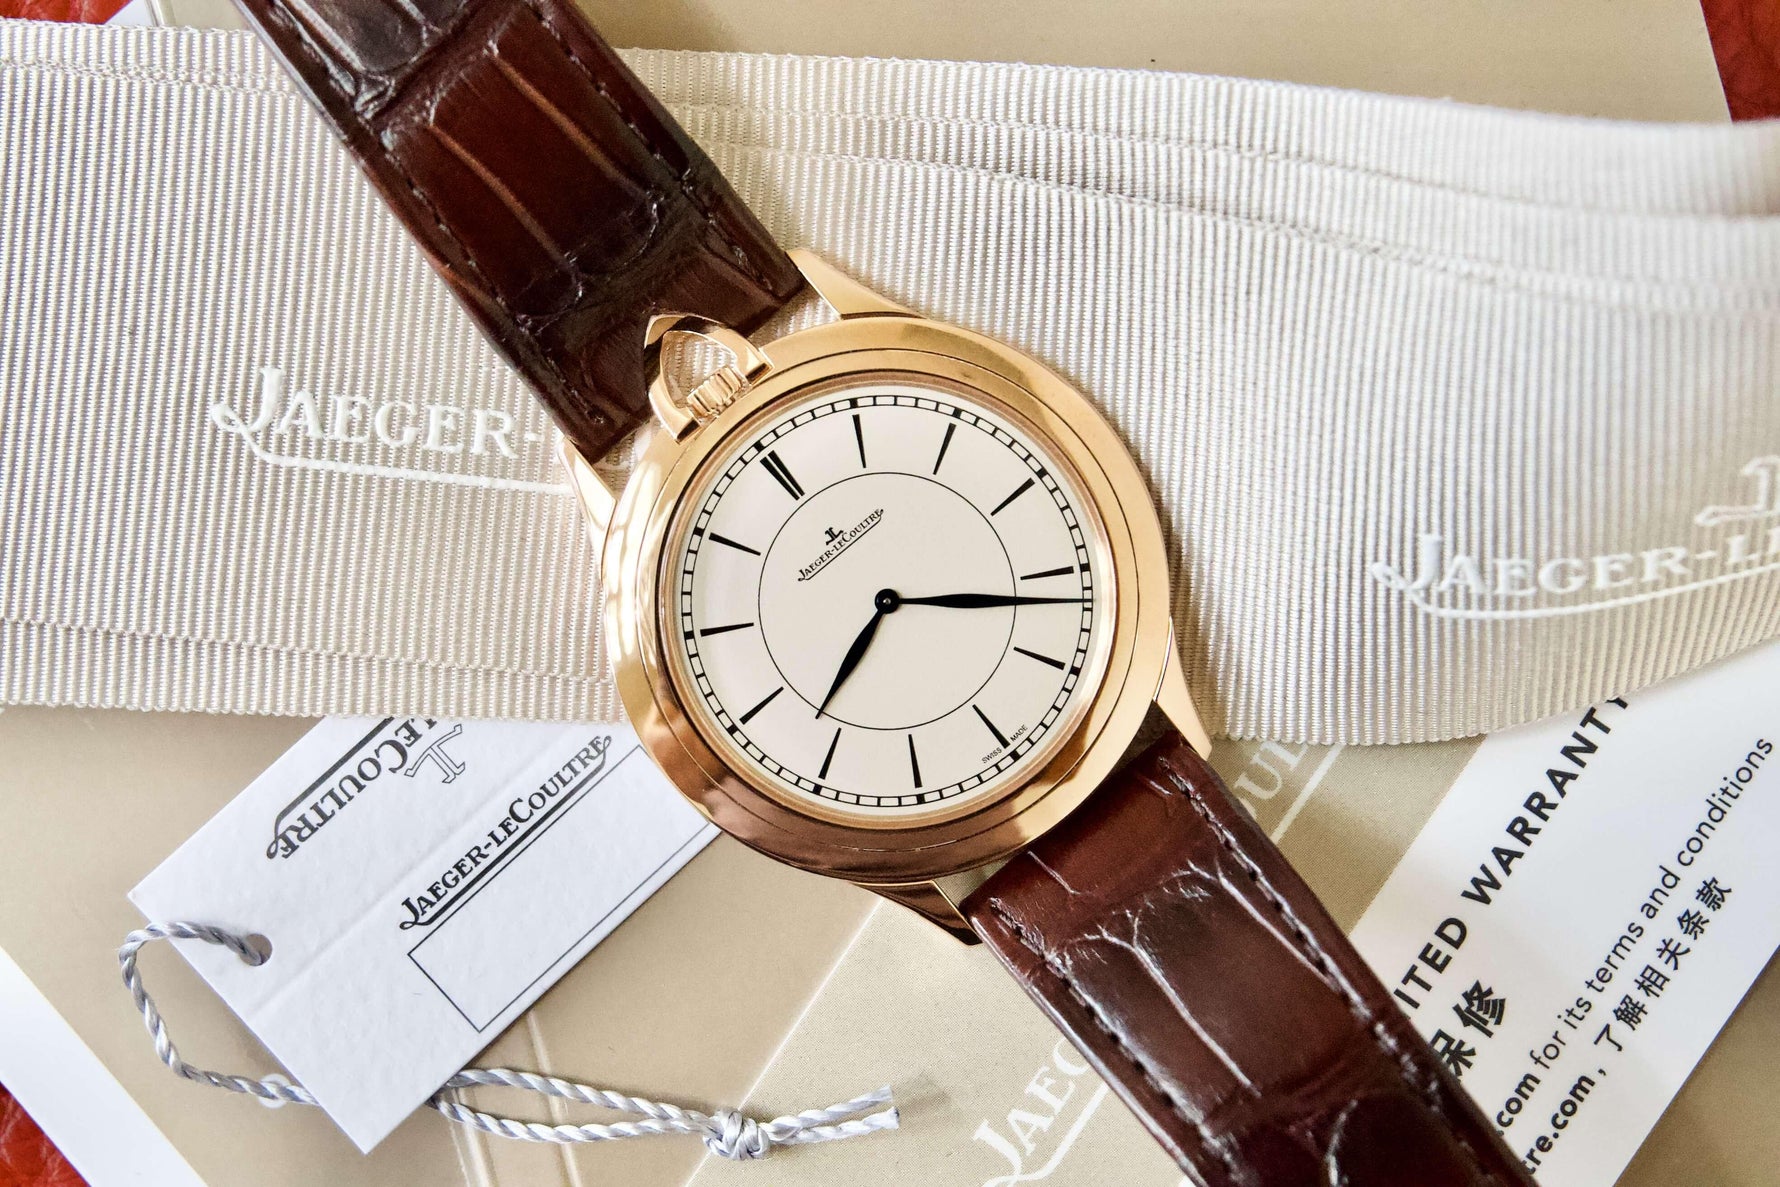 SOLD OUT: Jaeger LeCoultre Master Ultra Thin Kingsman Knife Q1152520 #1/100 Pink Gold Watch NEW - WearingTime Luxury Watches